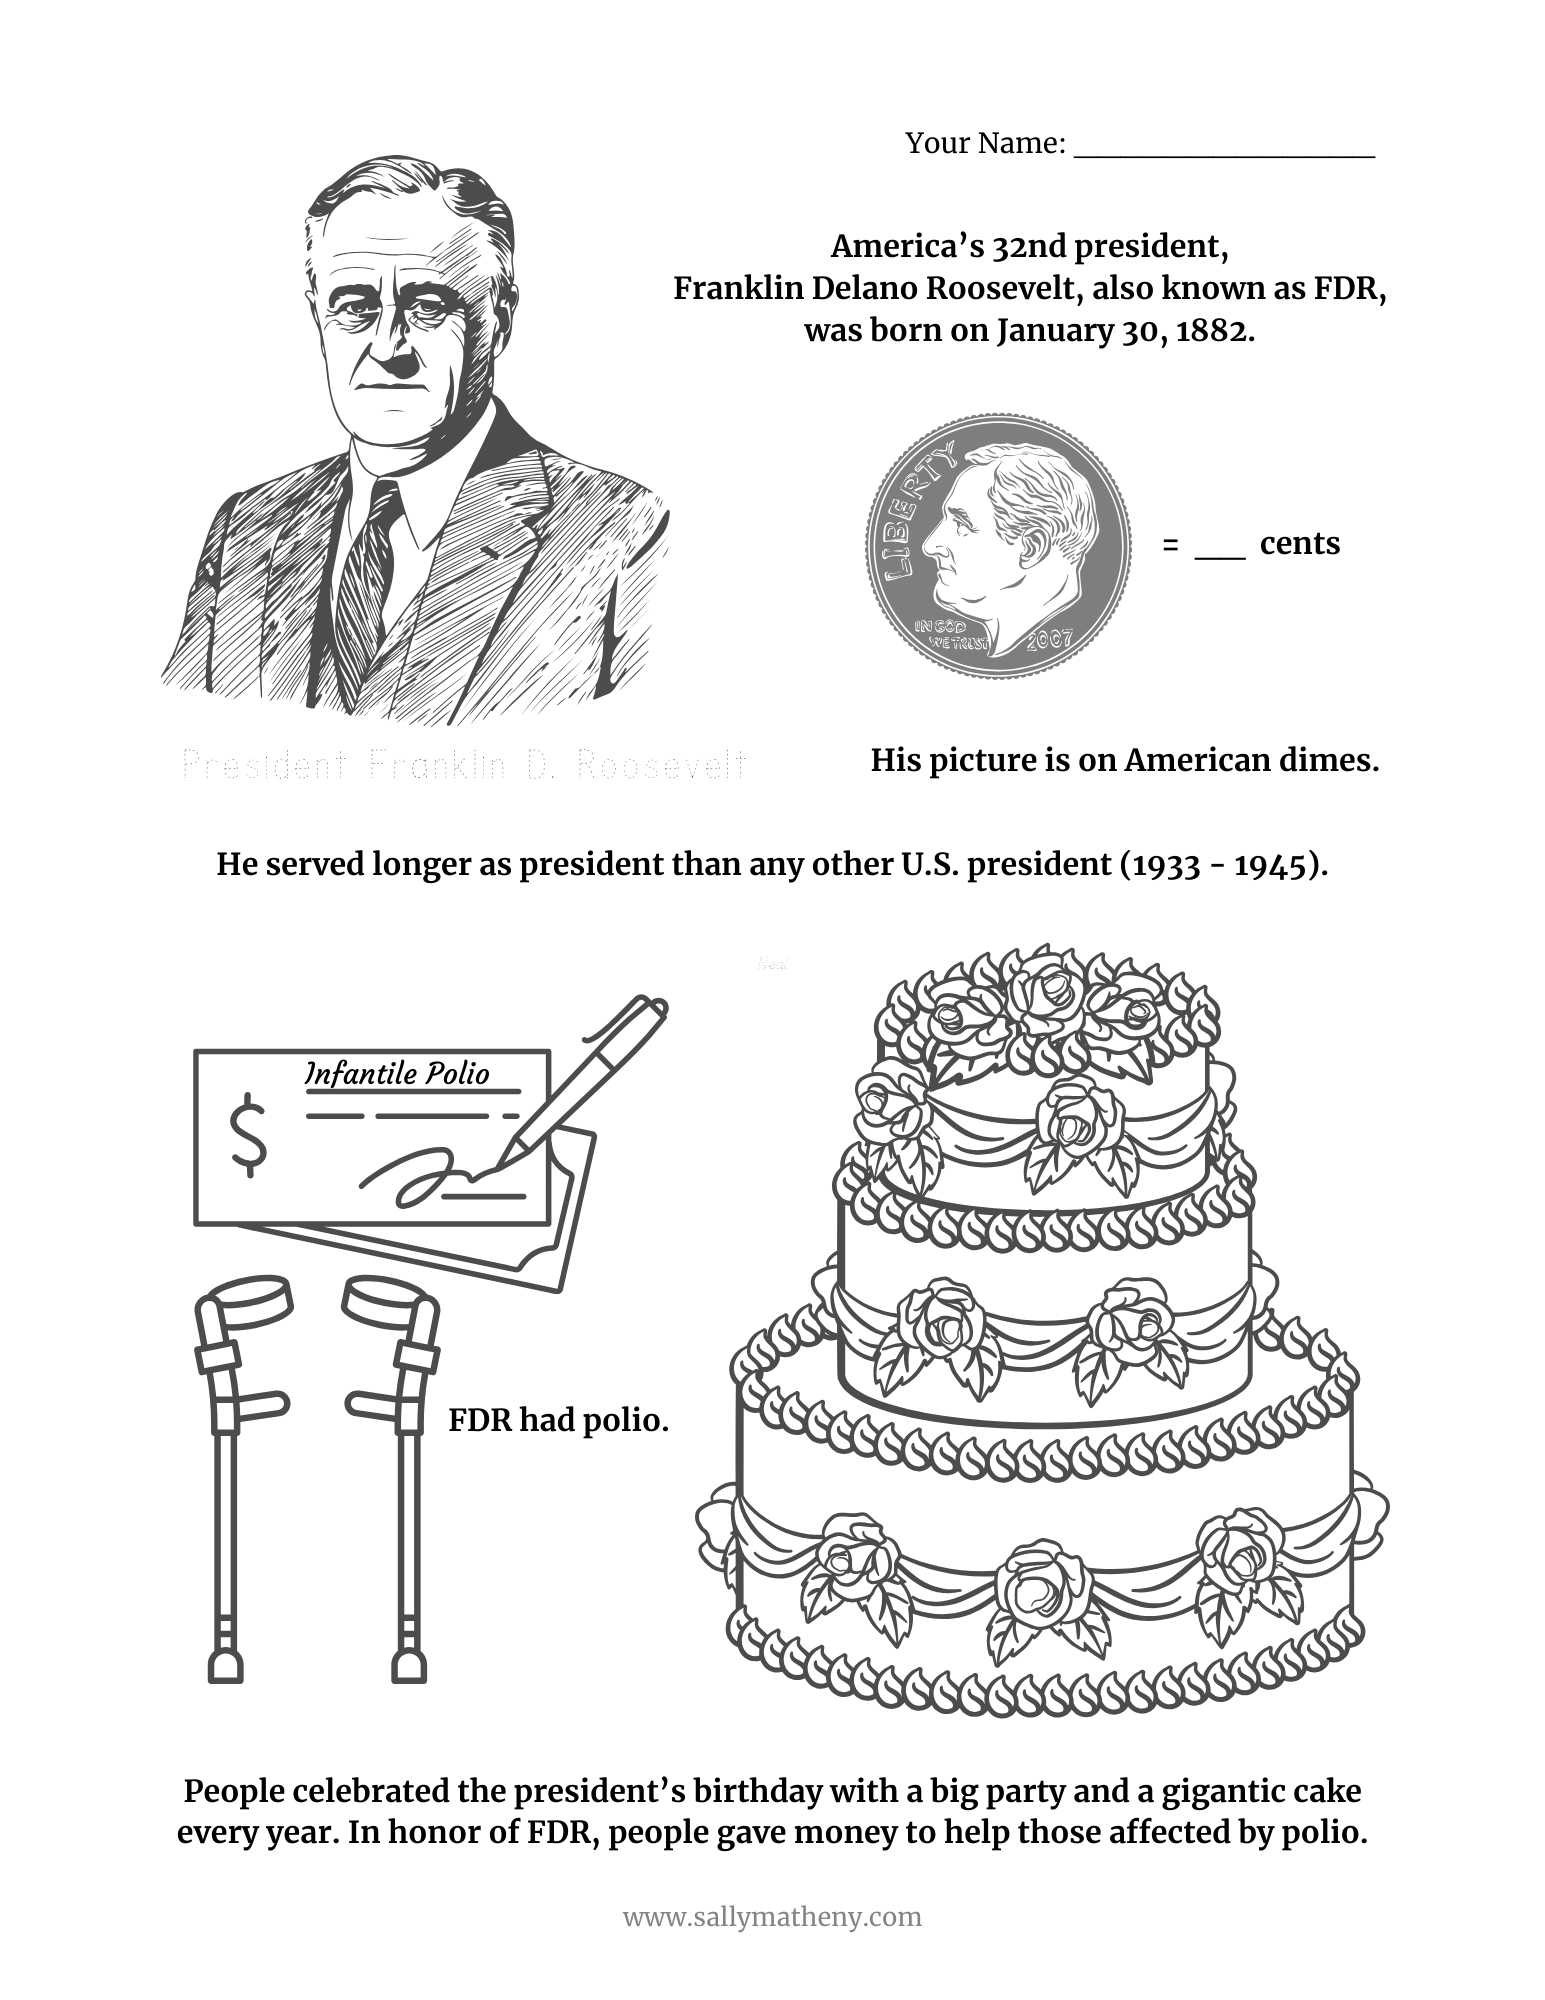 President Franklin D. Roosevelt's Birthday Activity Sheet designed by Sally Matheny. Free download for students.